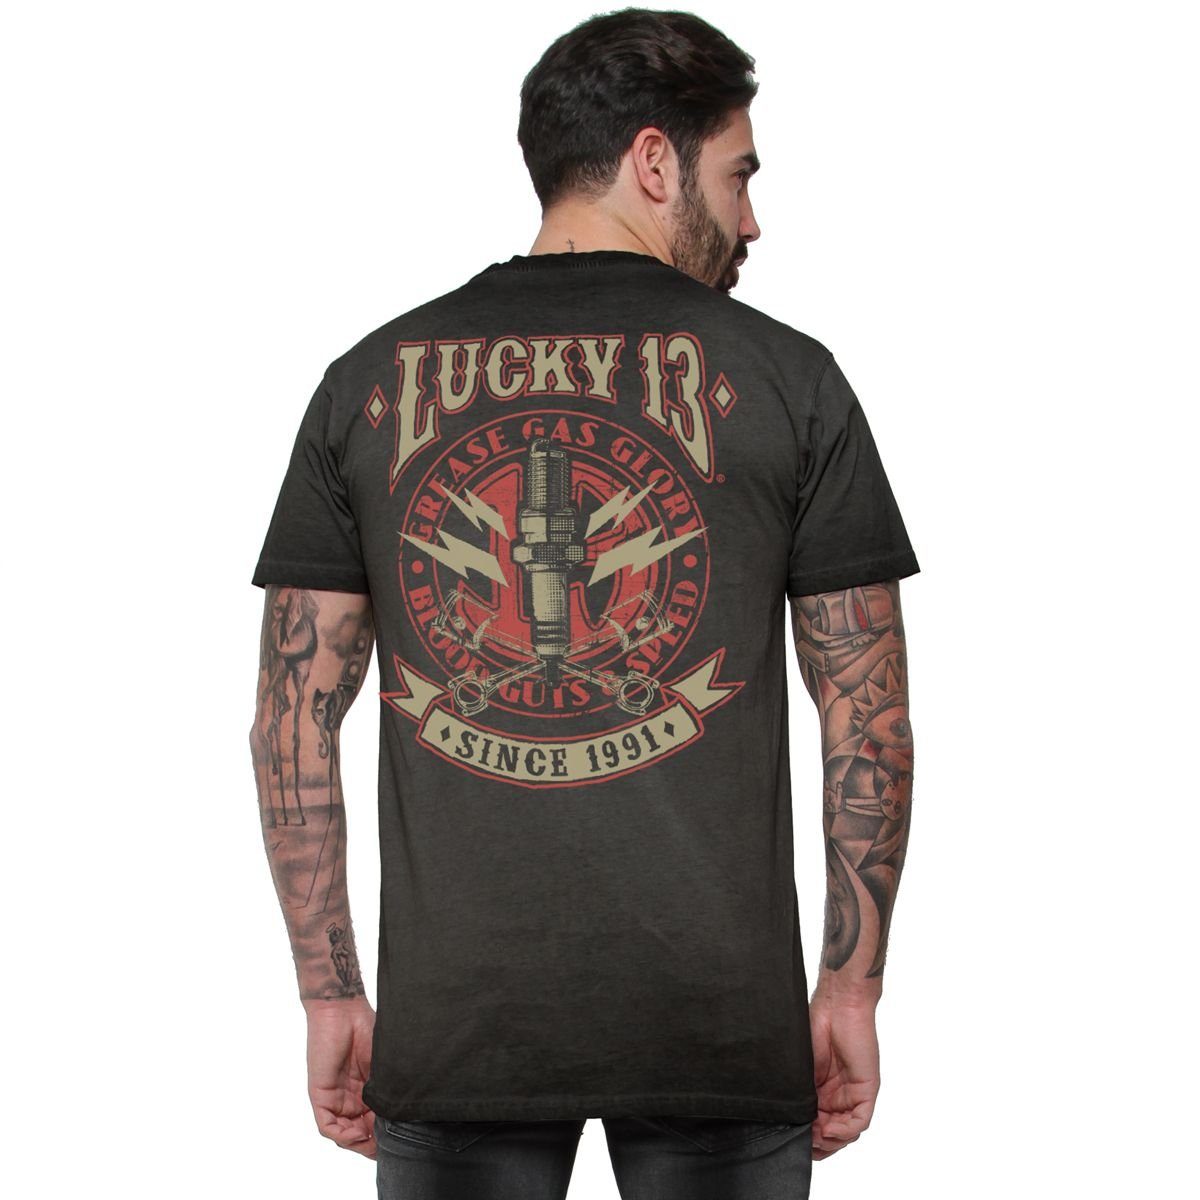 T-Shirt Adult Amped black 13 Herren Lucky Lucky T-Shirt washed 13